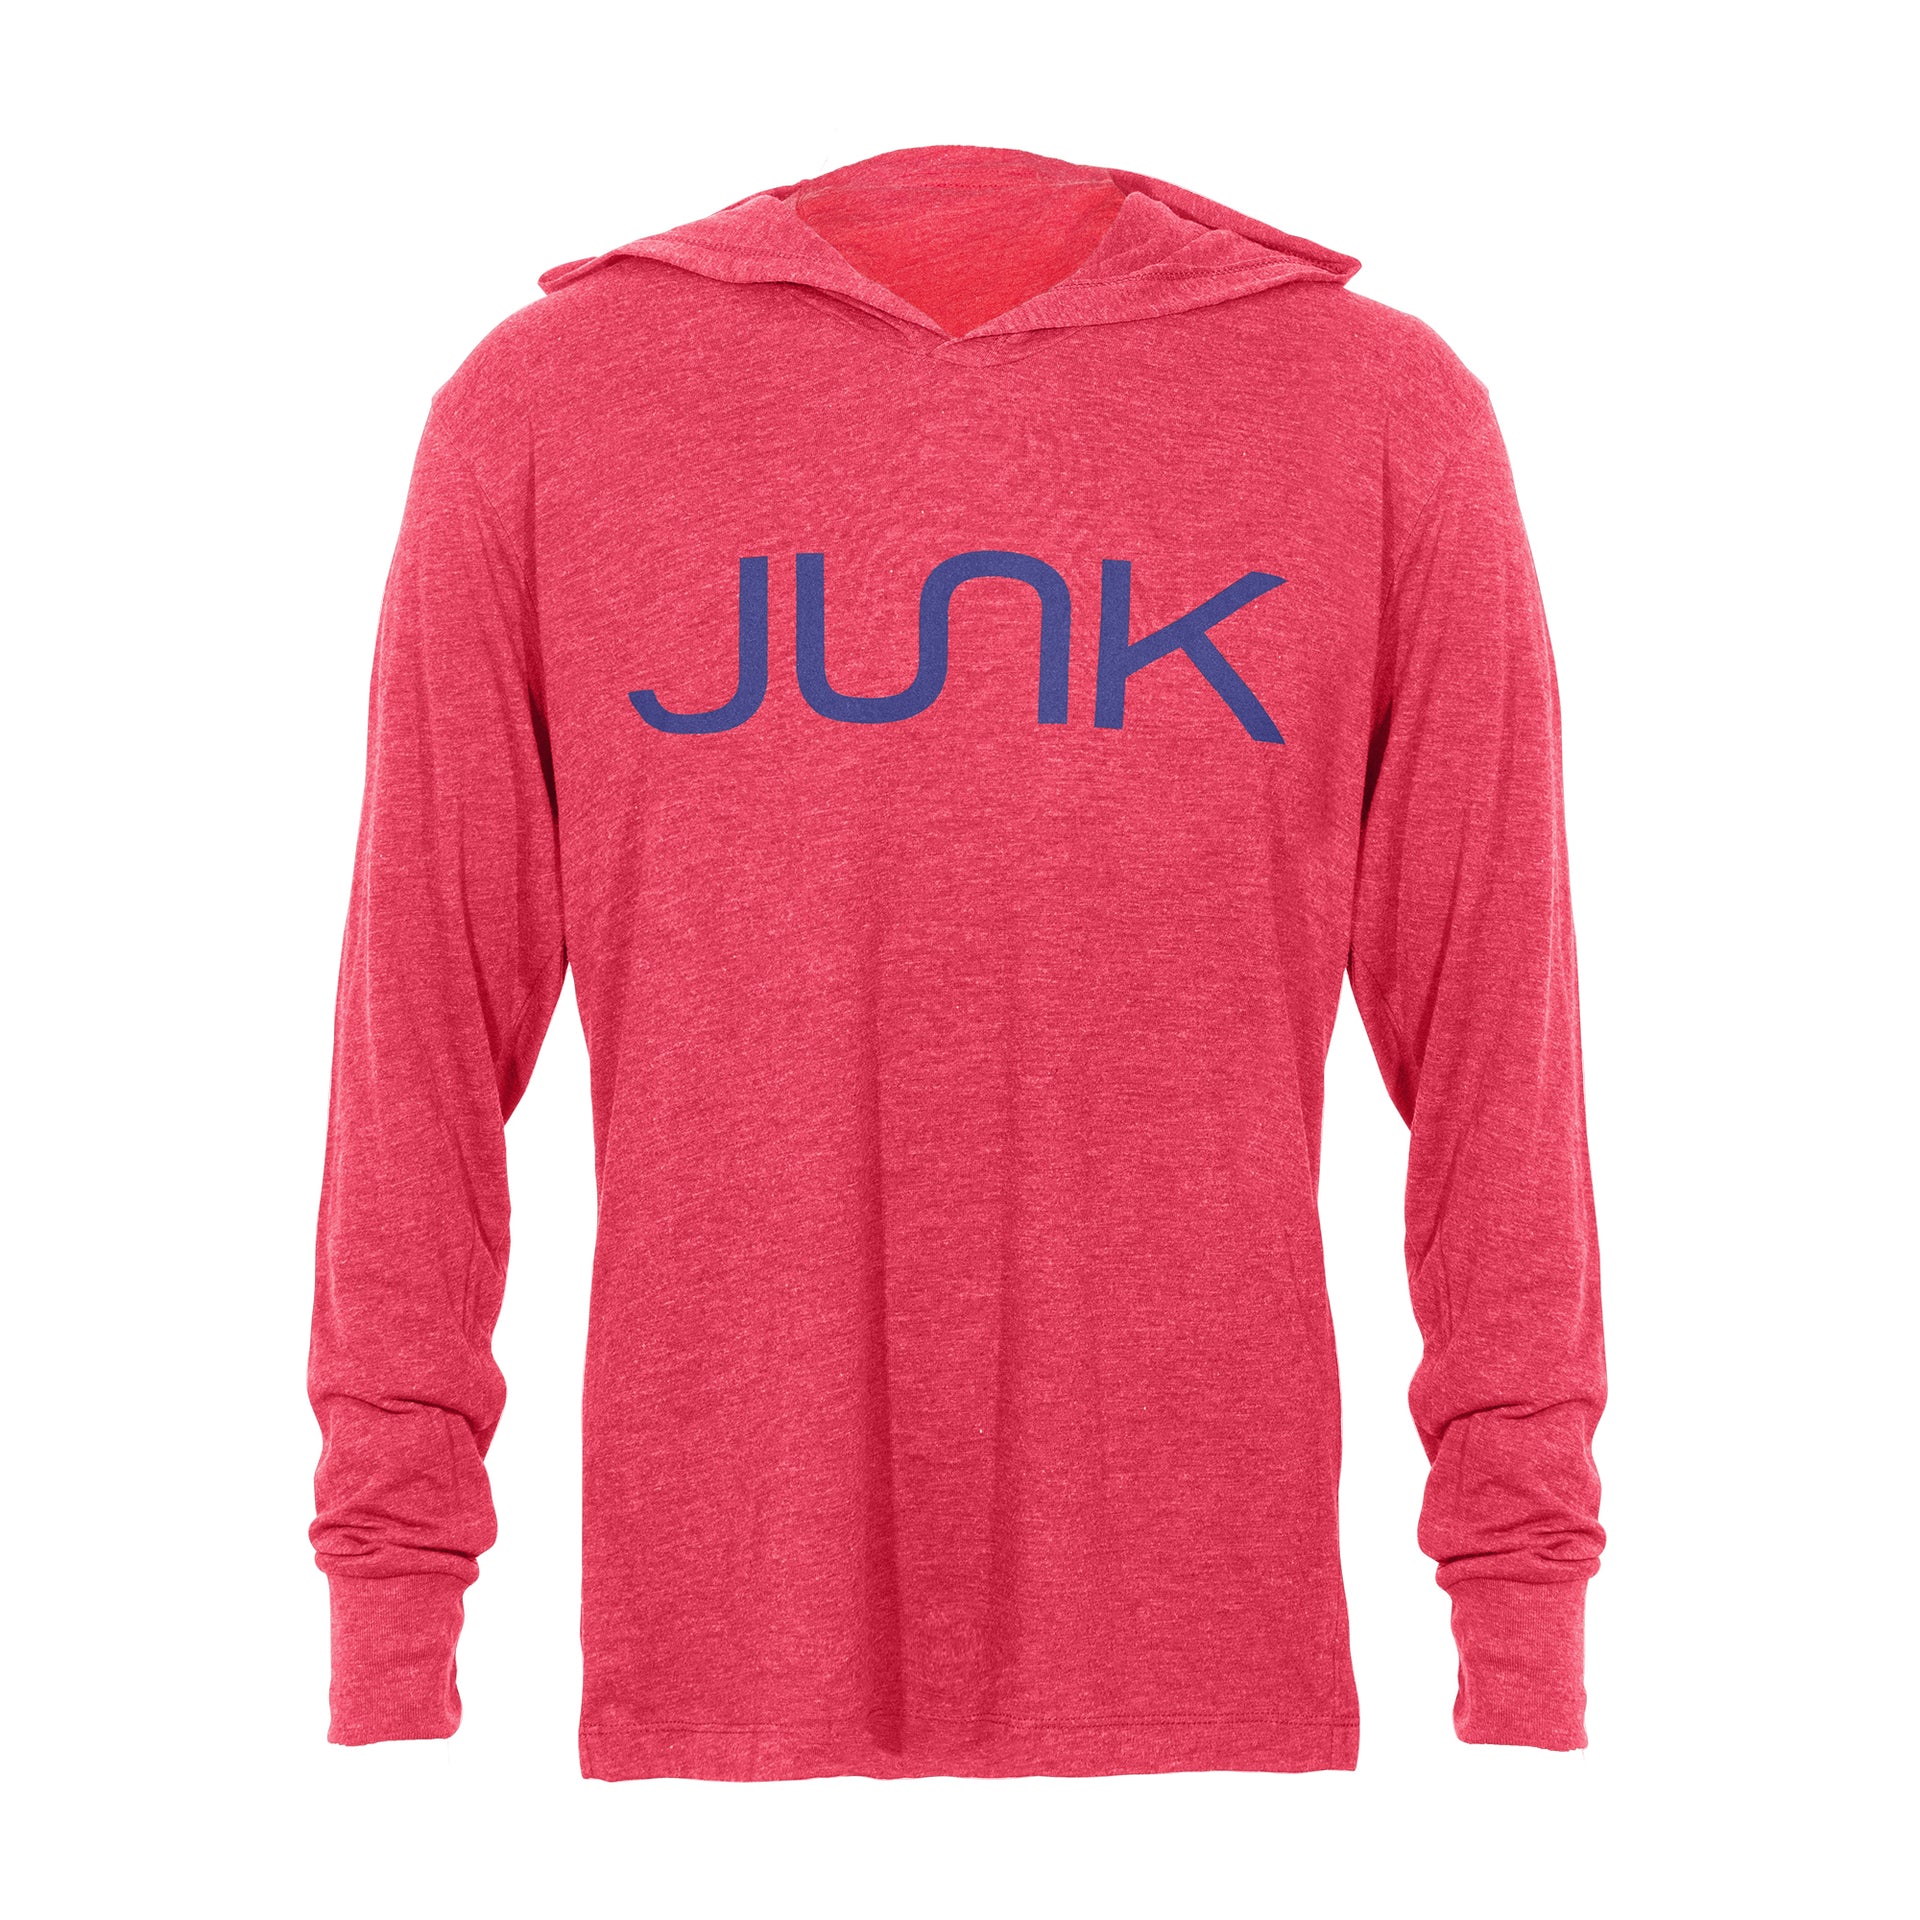 JUNK Tri-Blend Red Hooded Tee - View 1